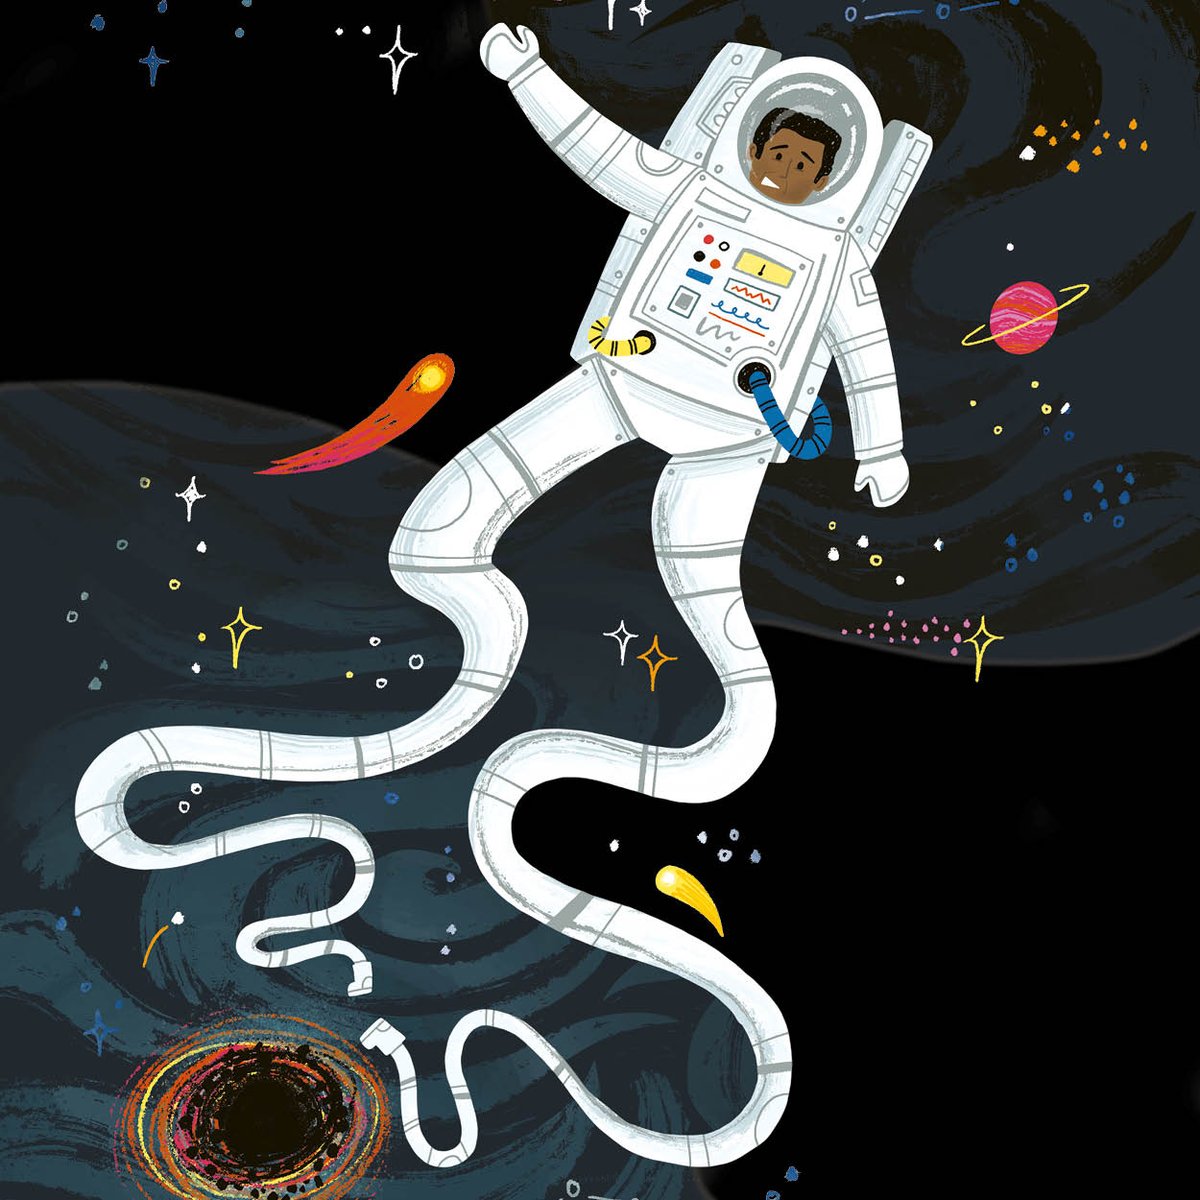 The young reader in your life probably knows about black holes, but do they know that if they got too close to a supermassive black hole, they would be stretched towards it like a spaghetti in a process called spaghettification?! 📚The Big Book of Useless Knowledge 🎨@LizKayillo